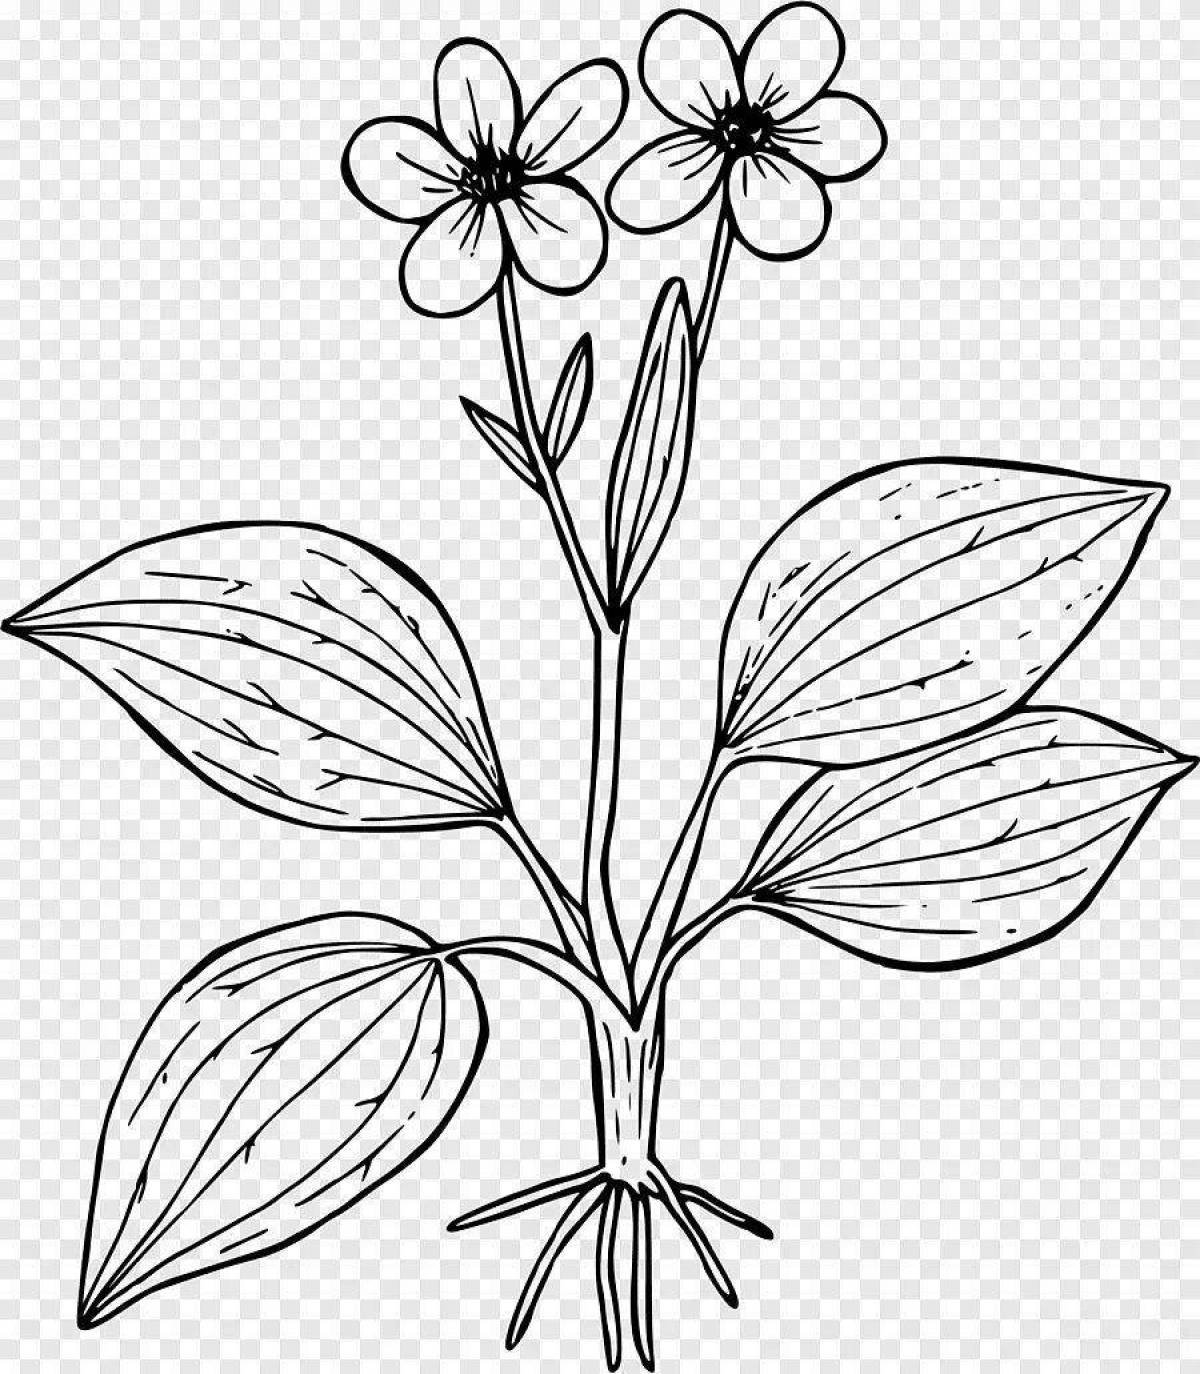 Awesome coloring pages of poisonous plants for kids